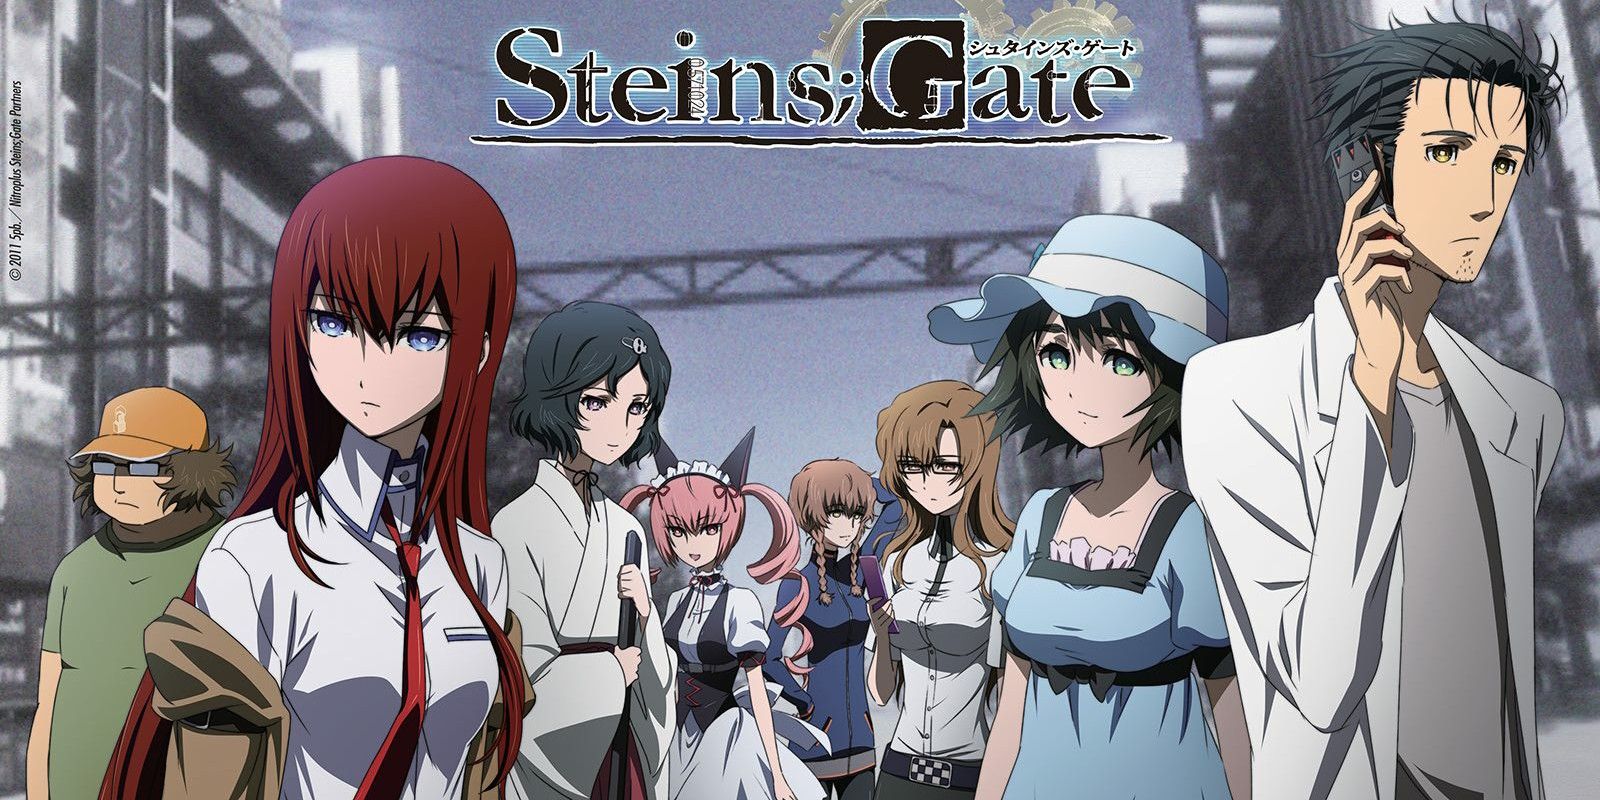 rintaro okabe and the rest of the main cast of steins;gate